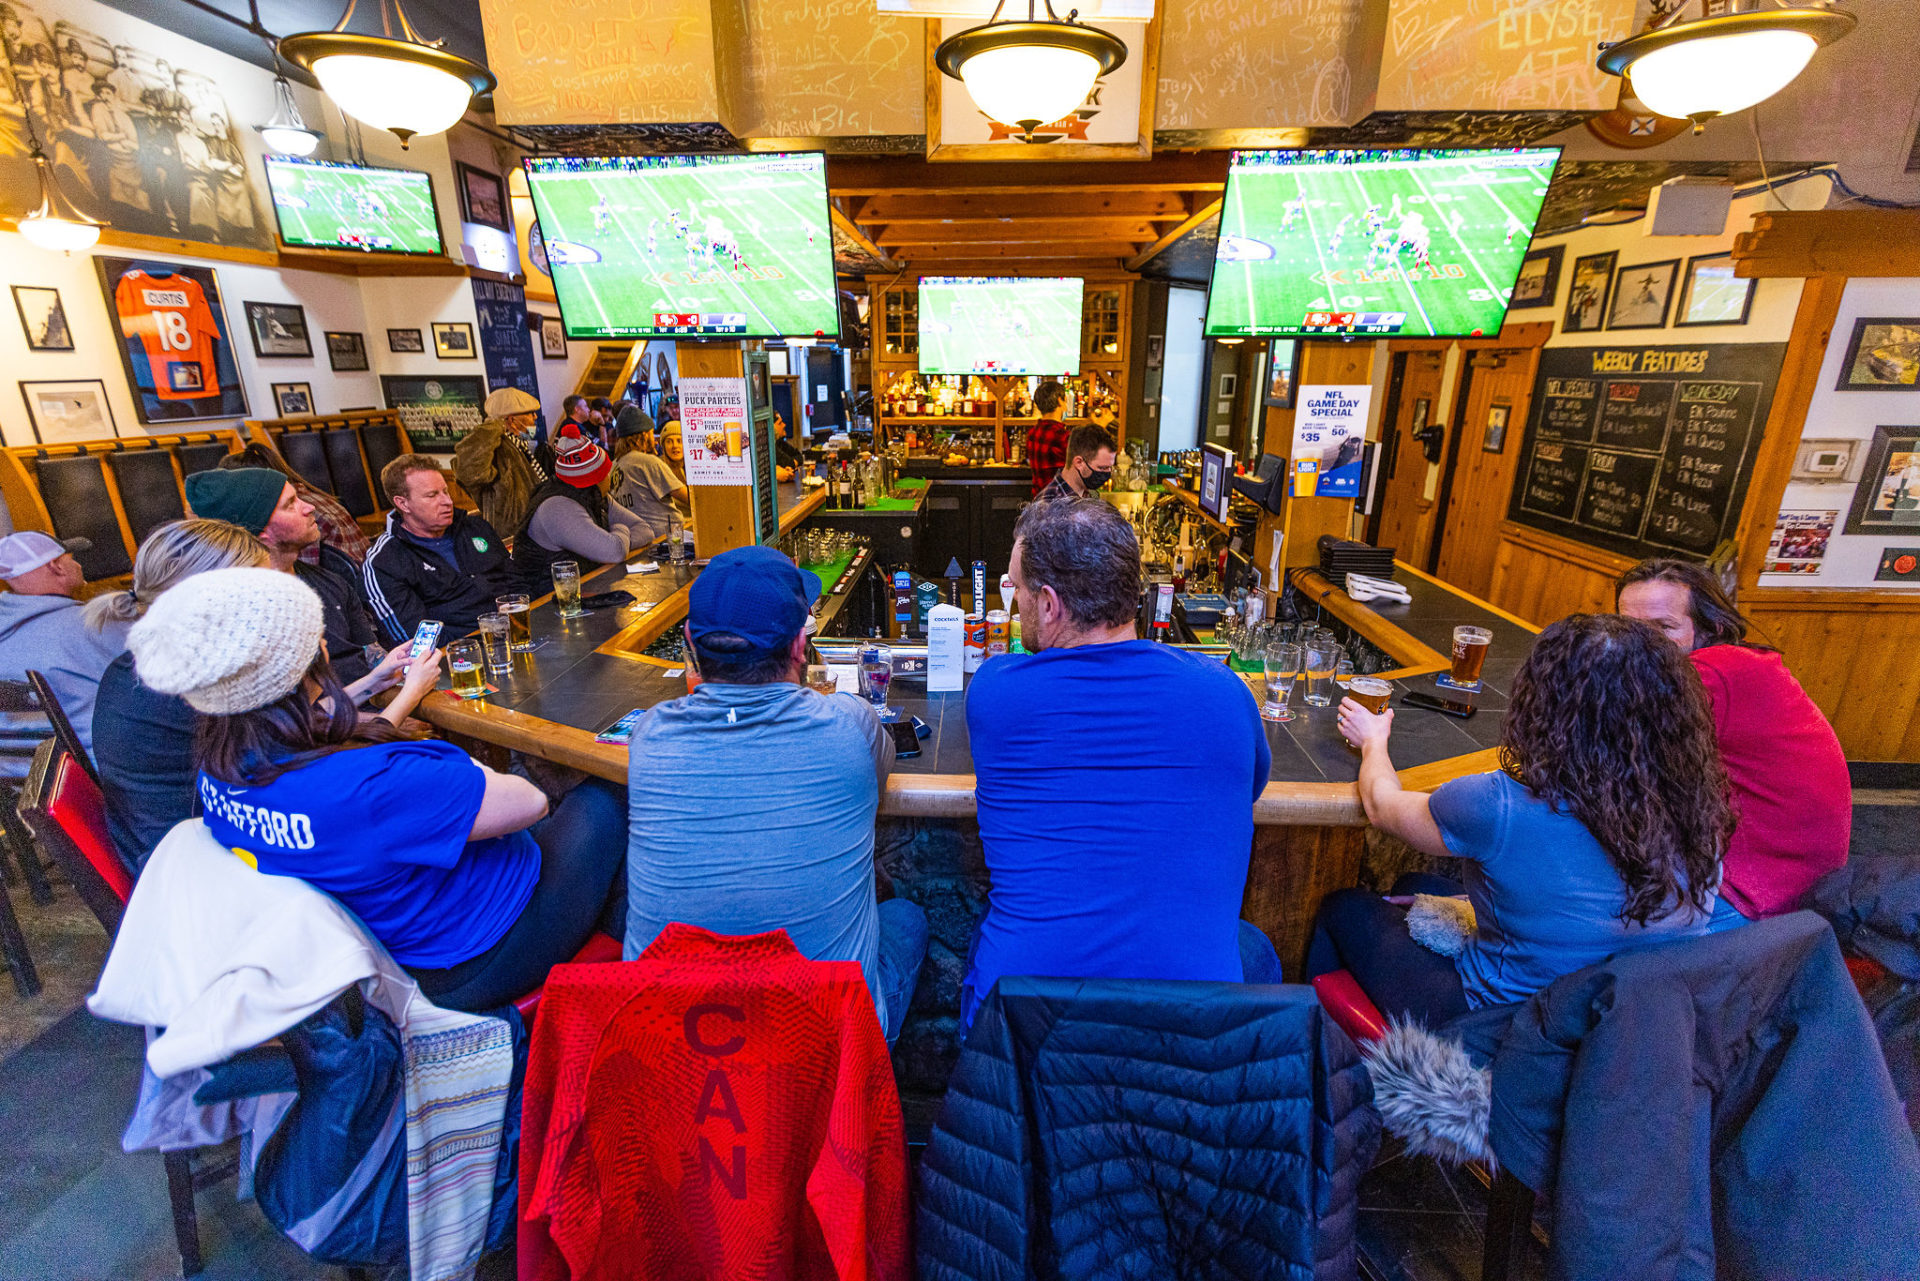 Catch “The 6 Nations” Rugby at The Elk & Oarsman’s: Your Go-To Sports Bar and Restaurant in Banff